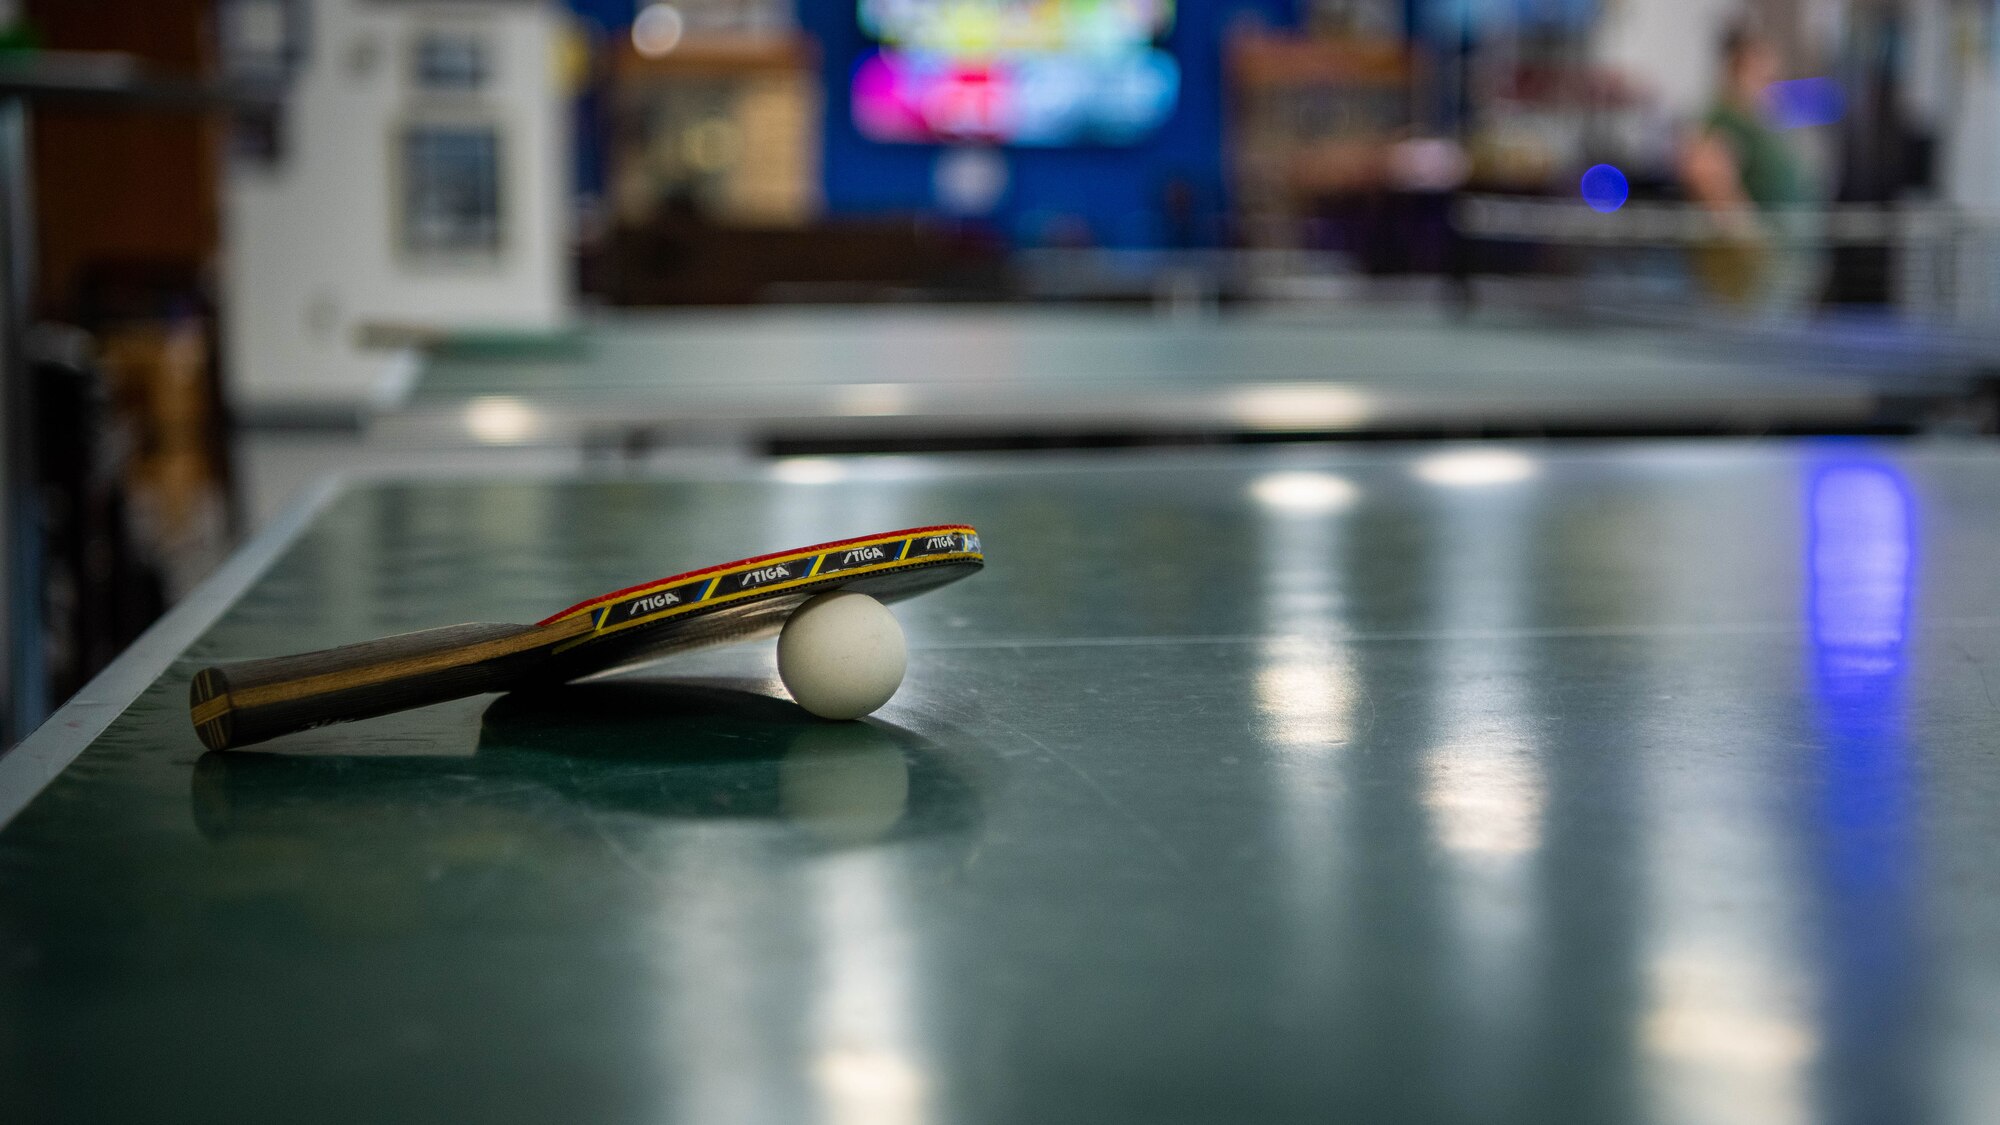 Table tennis paddle and ball sits on table.